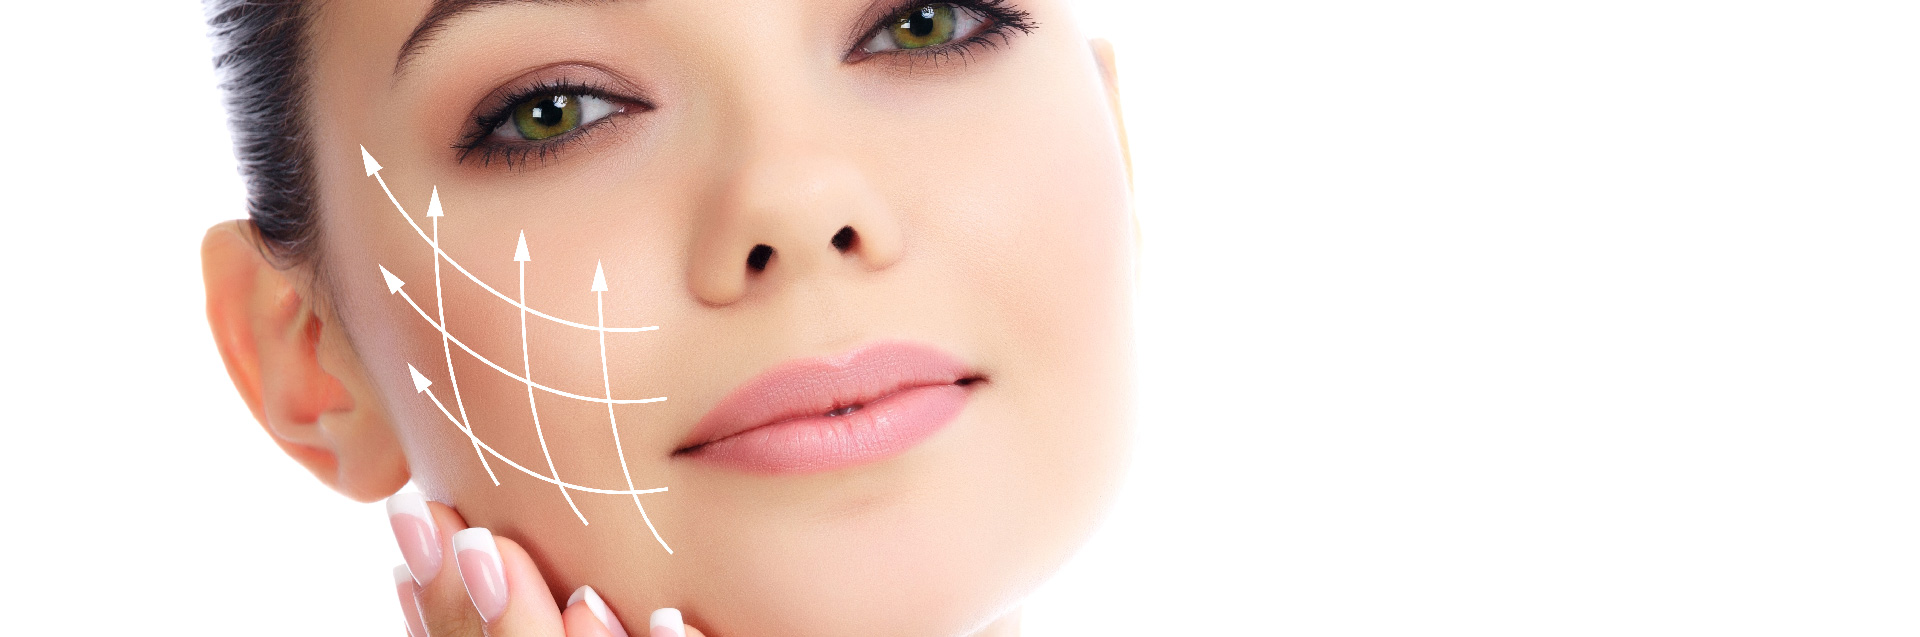 Botox injection Treatments Near Me In Tampa, Fl